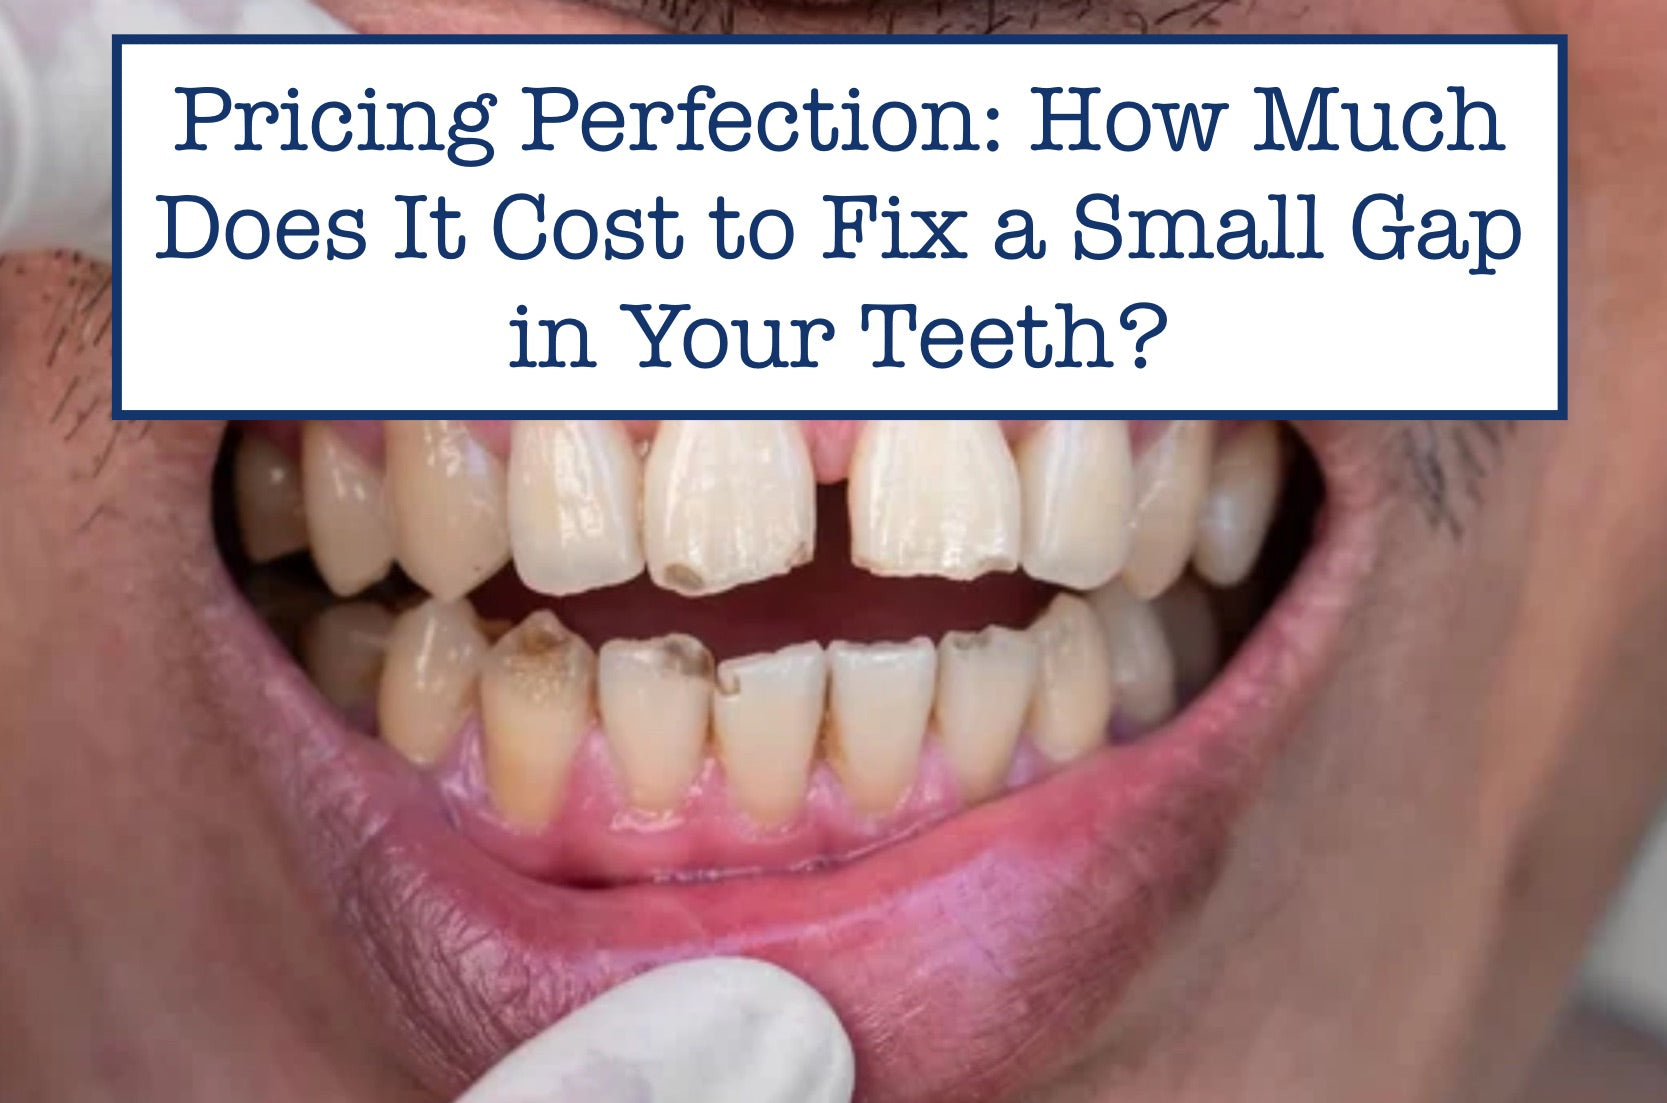 Pricing Perfection: How Much Does It Cost to Fix a Small Gap in Your Teeth?